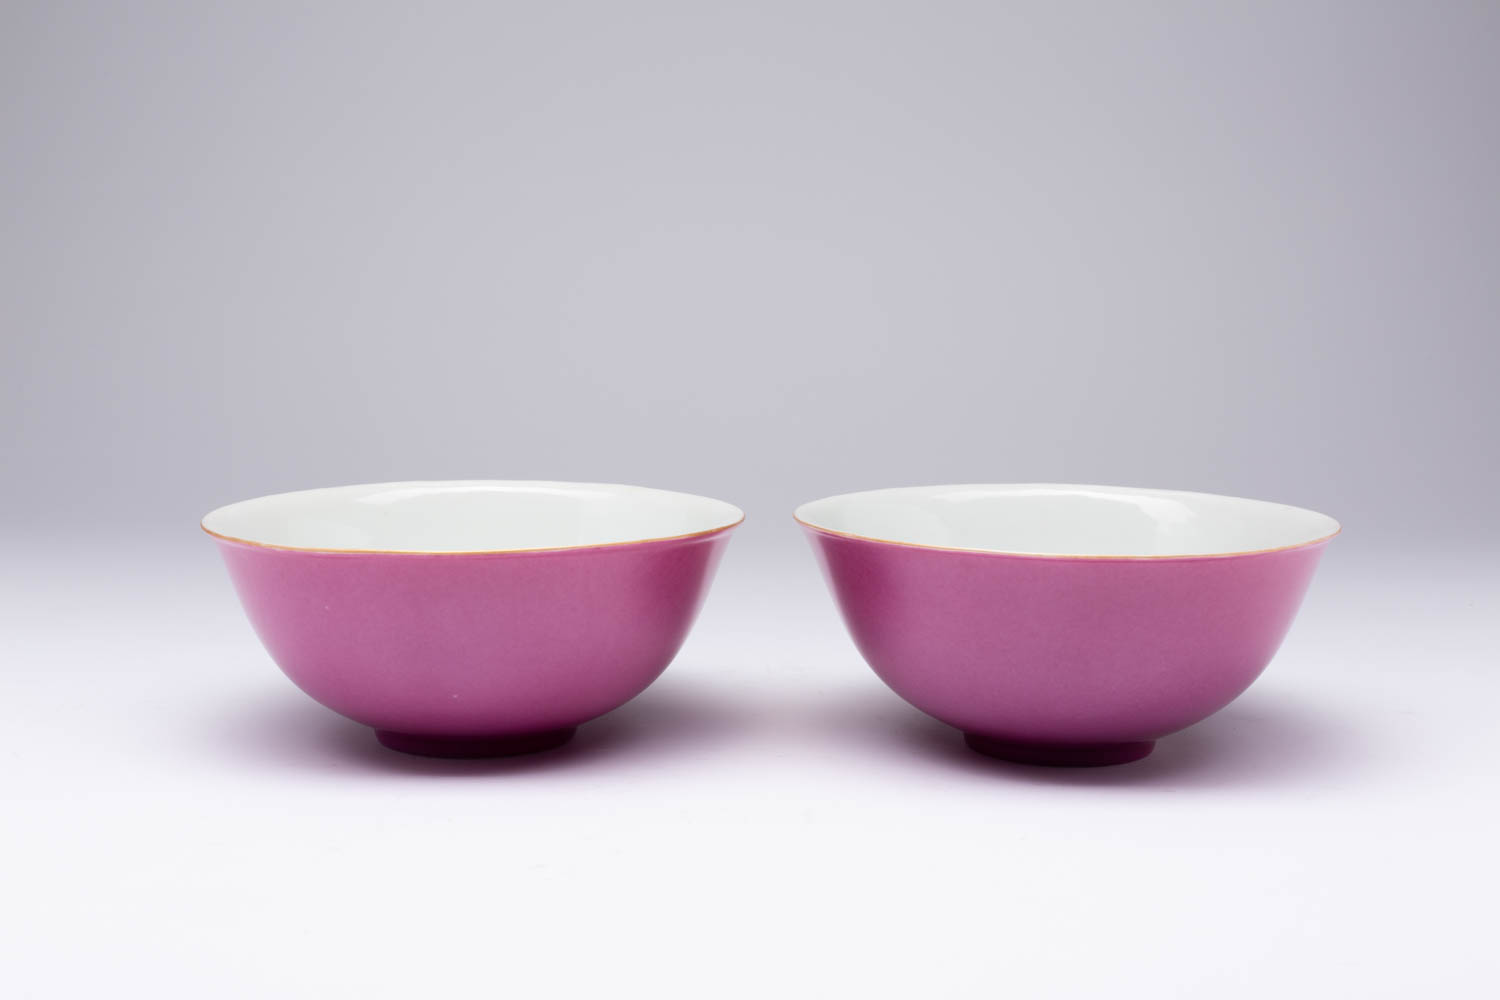 A PAIR OF CHINESE IMPERIAL PINK-ENAMELLED BOWLS SIX CHARACTER XUANTONG MARKS AND OF THE PERIOD